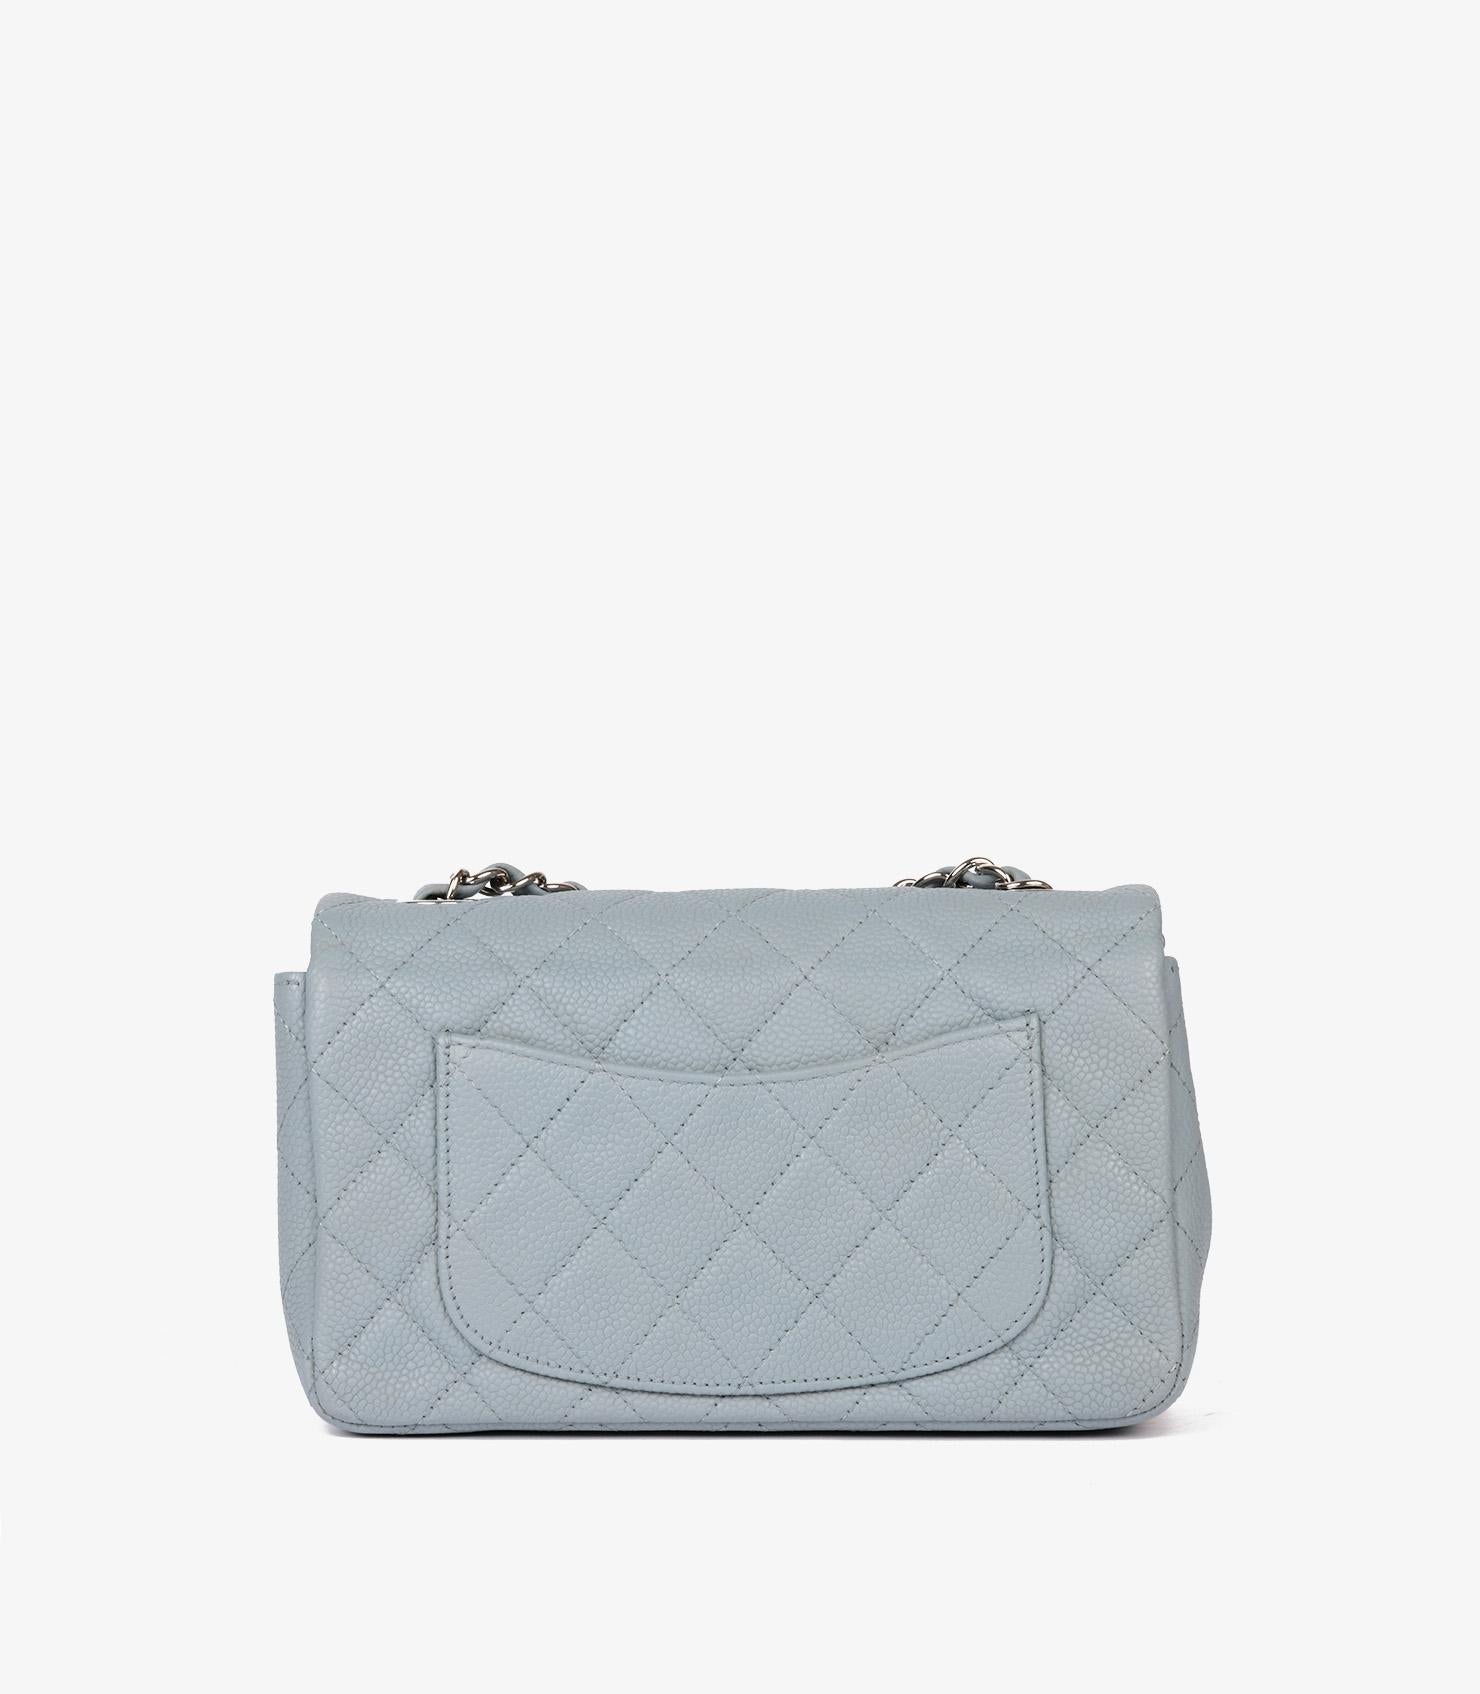 Chanel Grey Quilted Caviar Leather Rectangular Mini Flap Bag 1